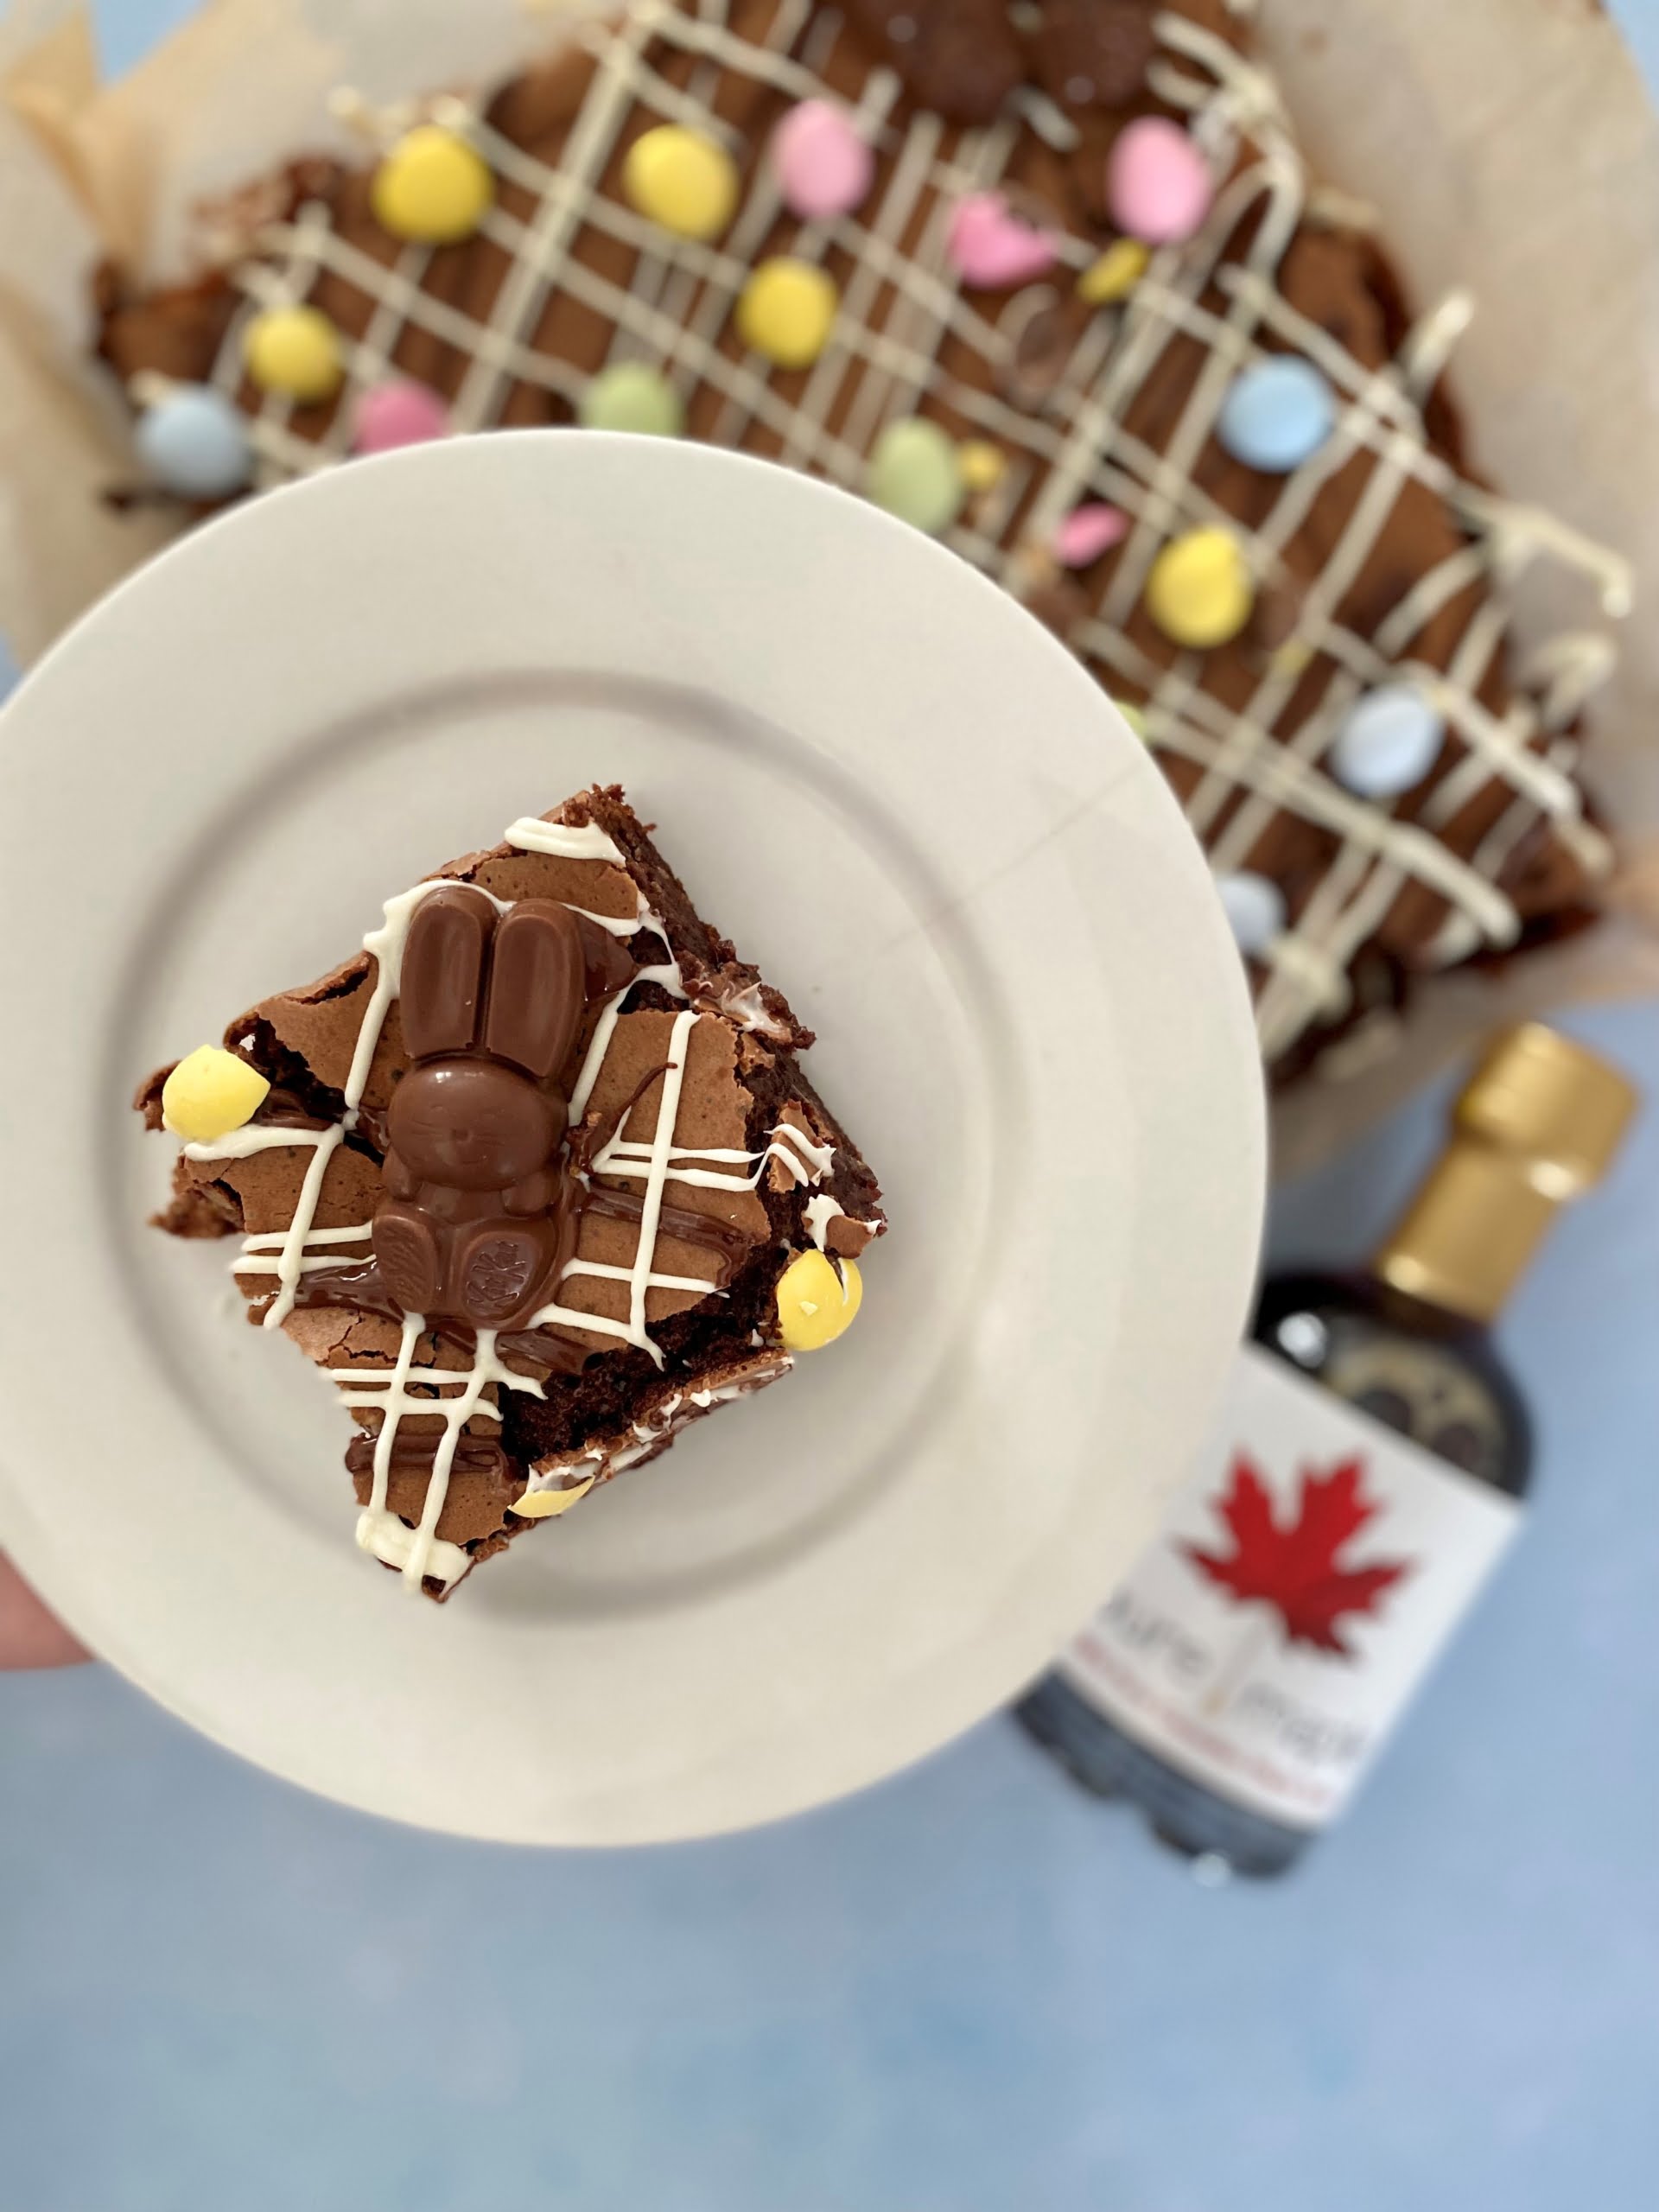 A slice of Easter Egg Brownie on a plate with the brownie and maple syrup bottle in the background